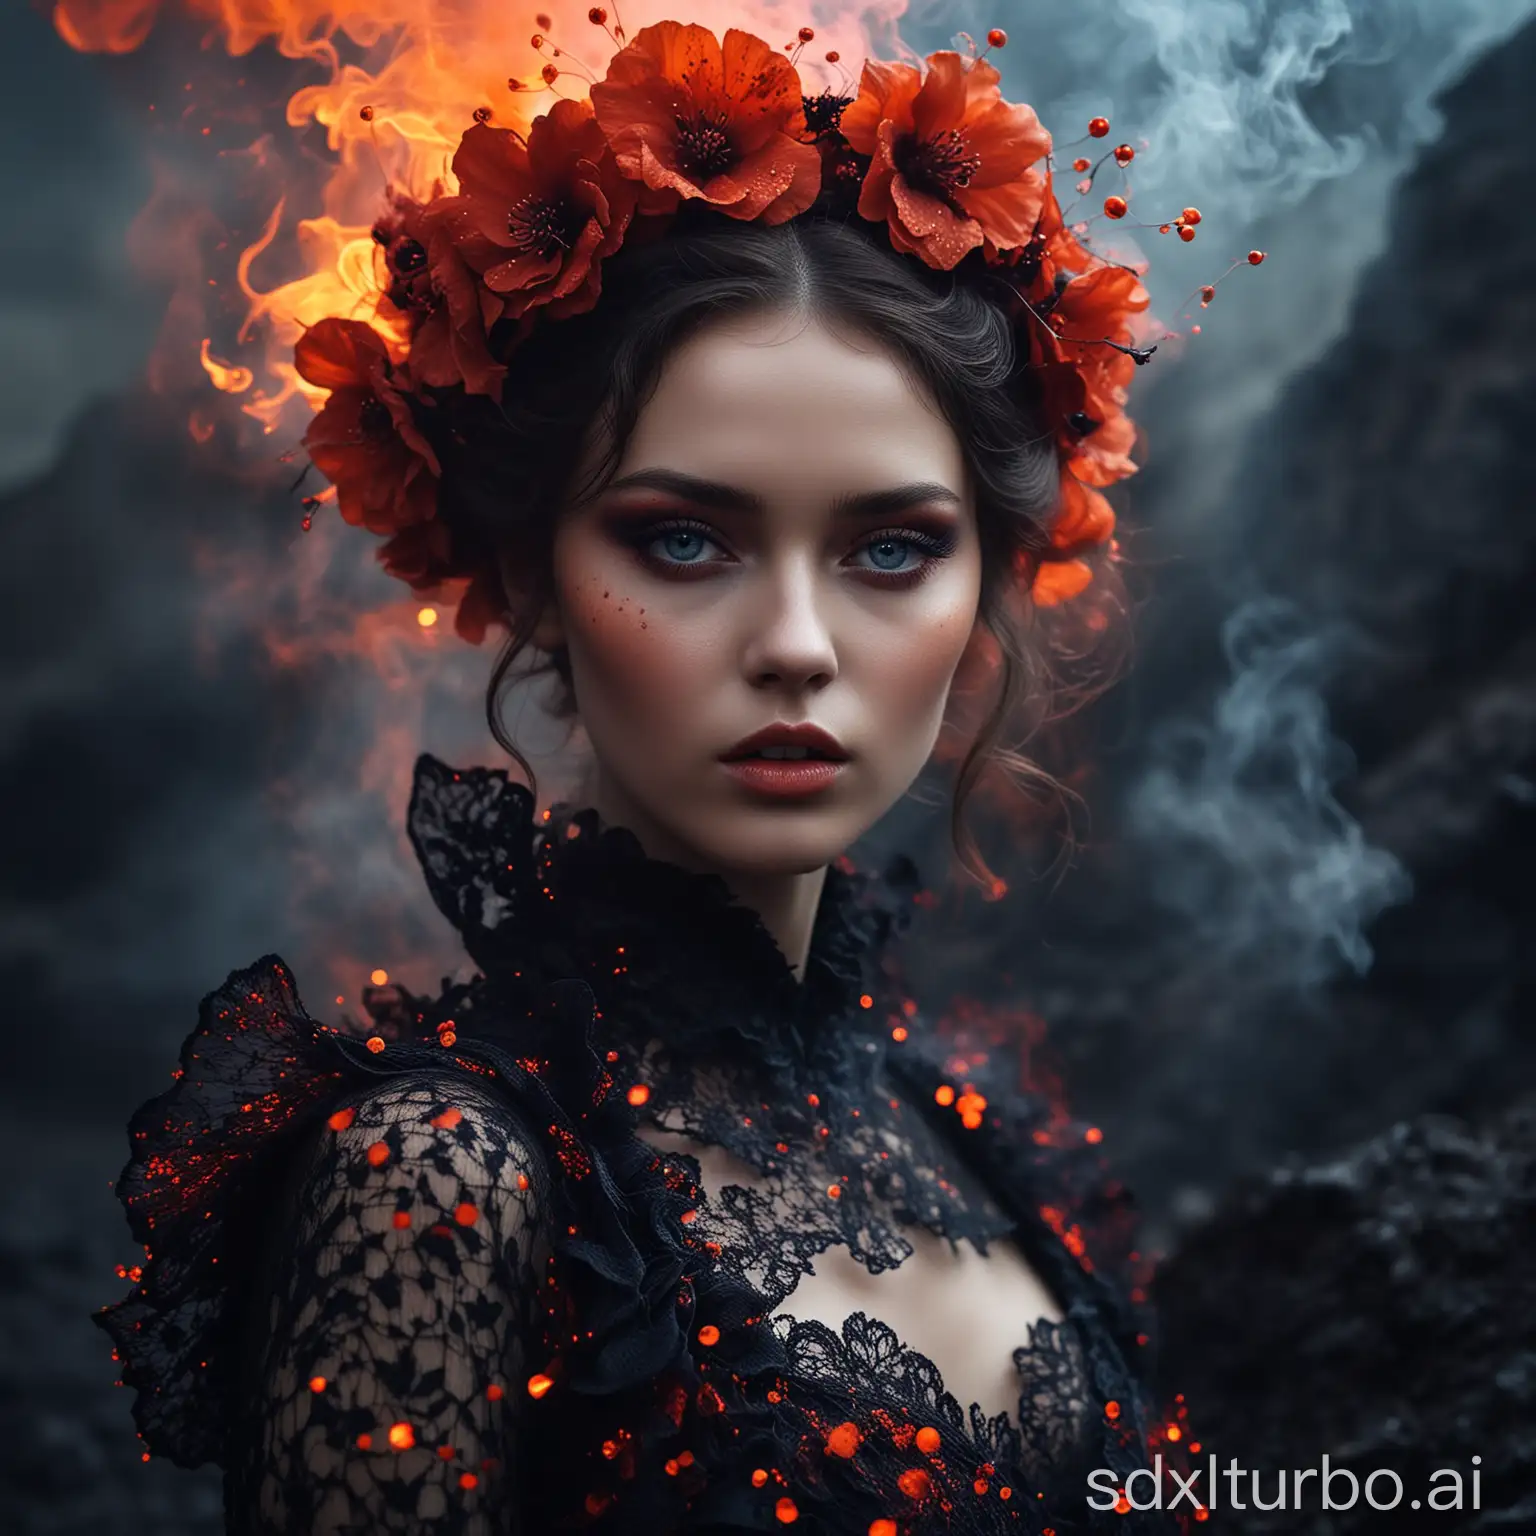 Fashion Photography, a hauntingly beautiful contrast – a model, beautiful, her eyes blue and luminous, embodies ethereal grace in a black and red Backlighting illuminates the volcanic landscape, smoke swirling around her like a misty dream, volcanic flowers glowing with biomorphic orange dots, couture rococo